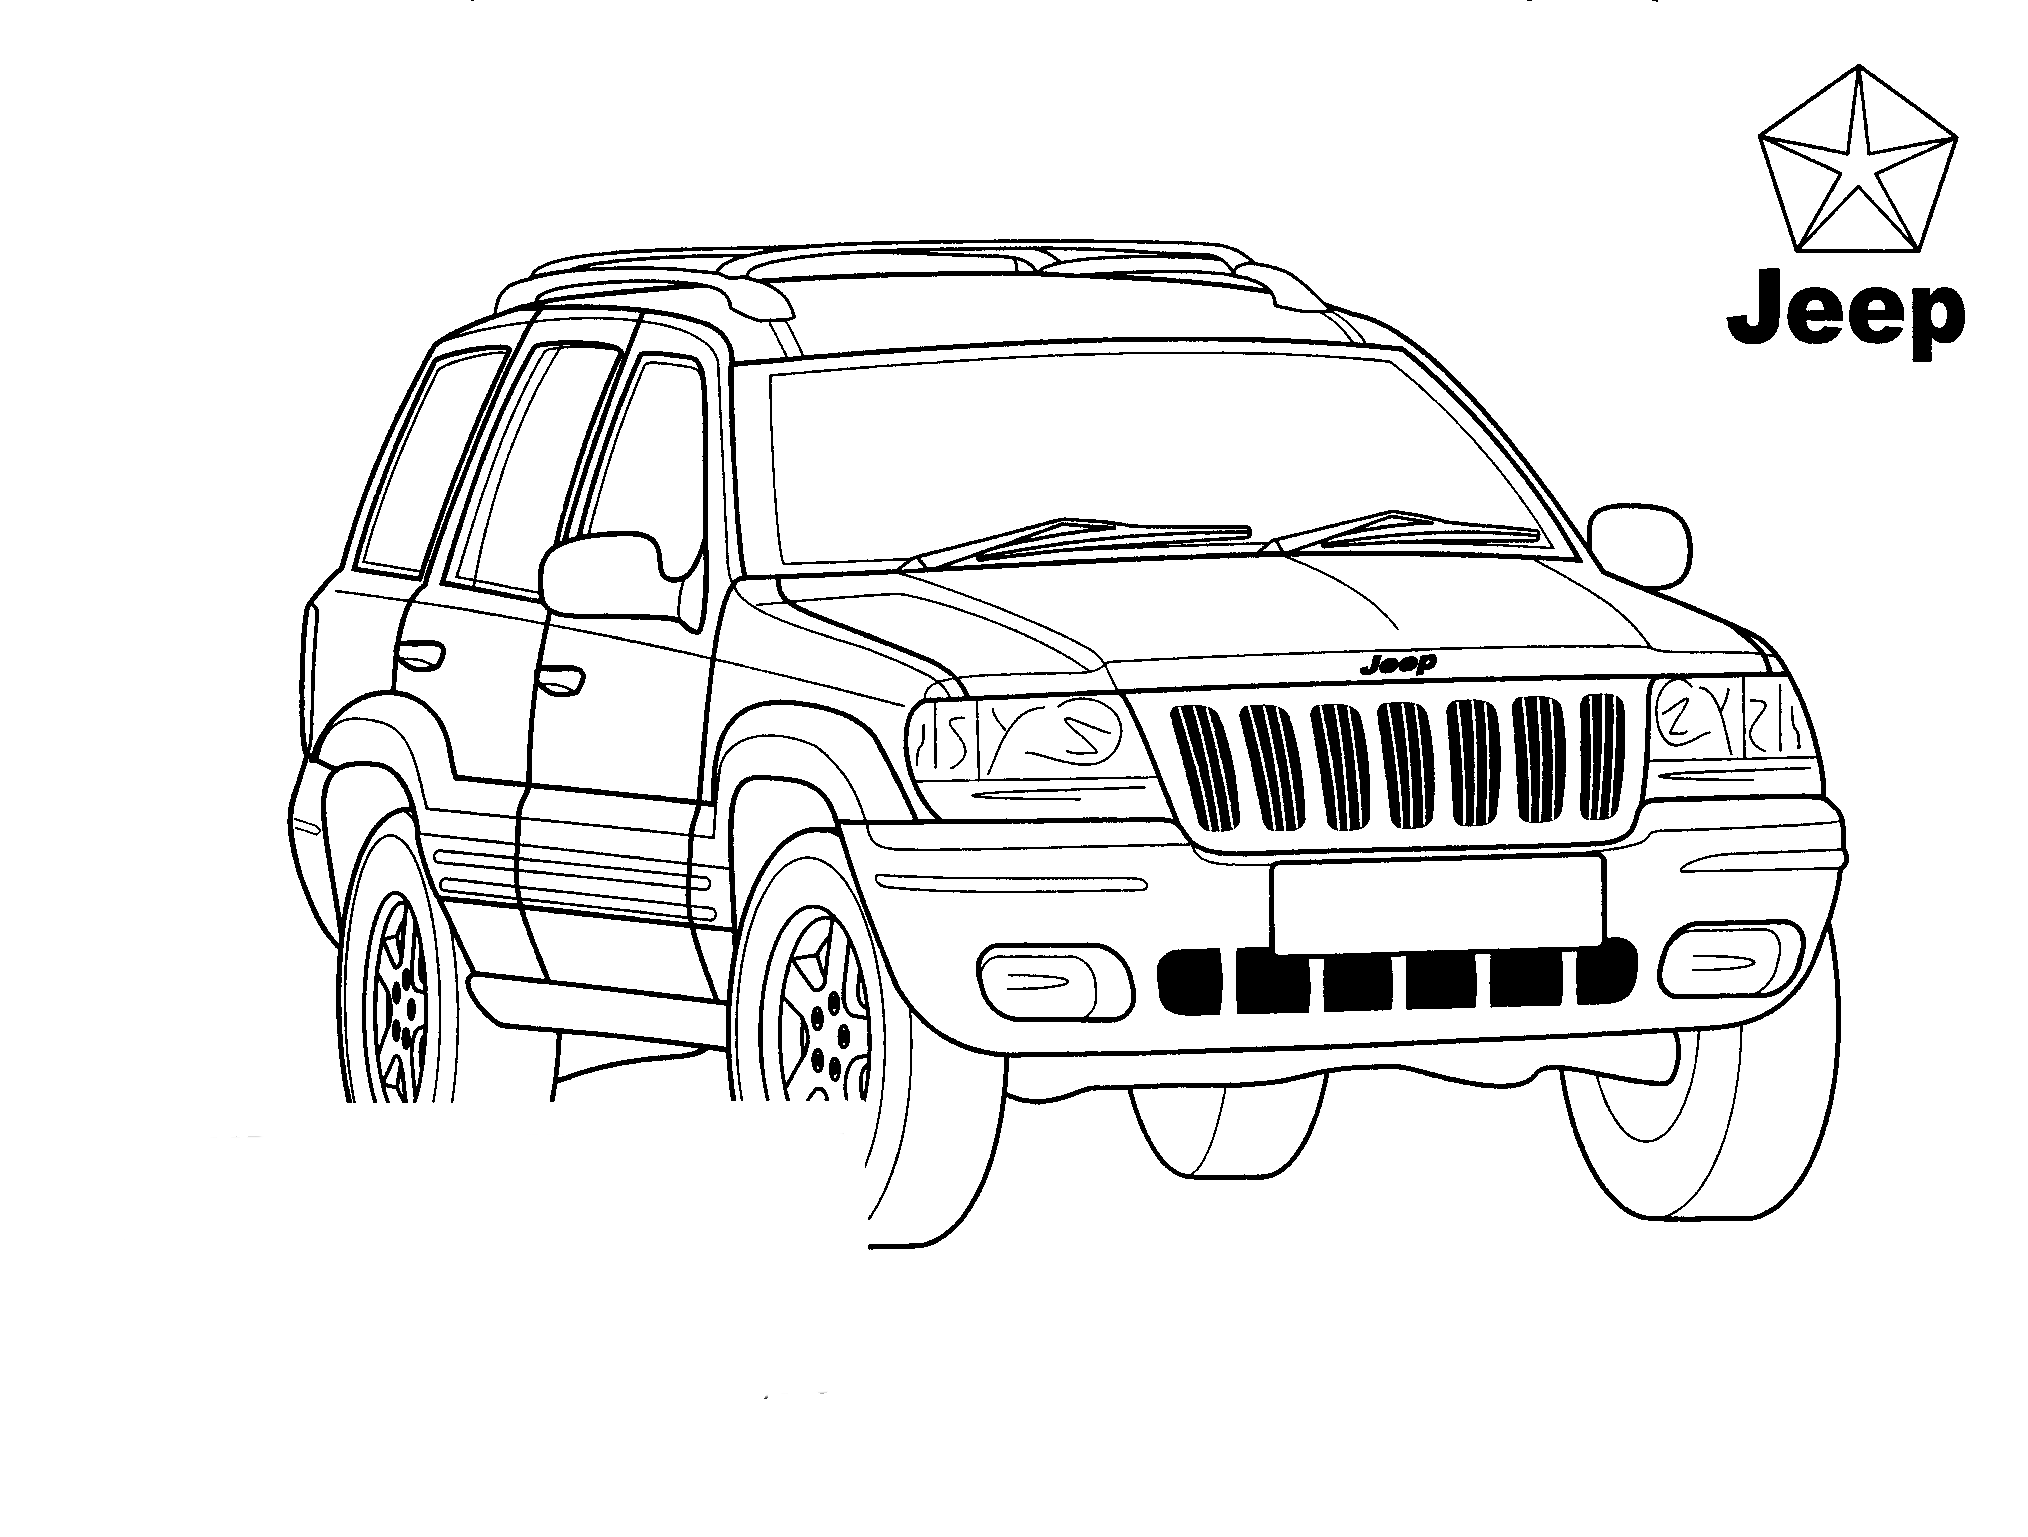 Coloring page - Jeep Grand